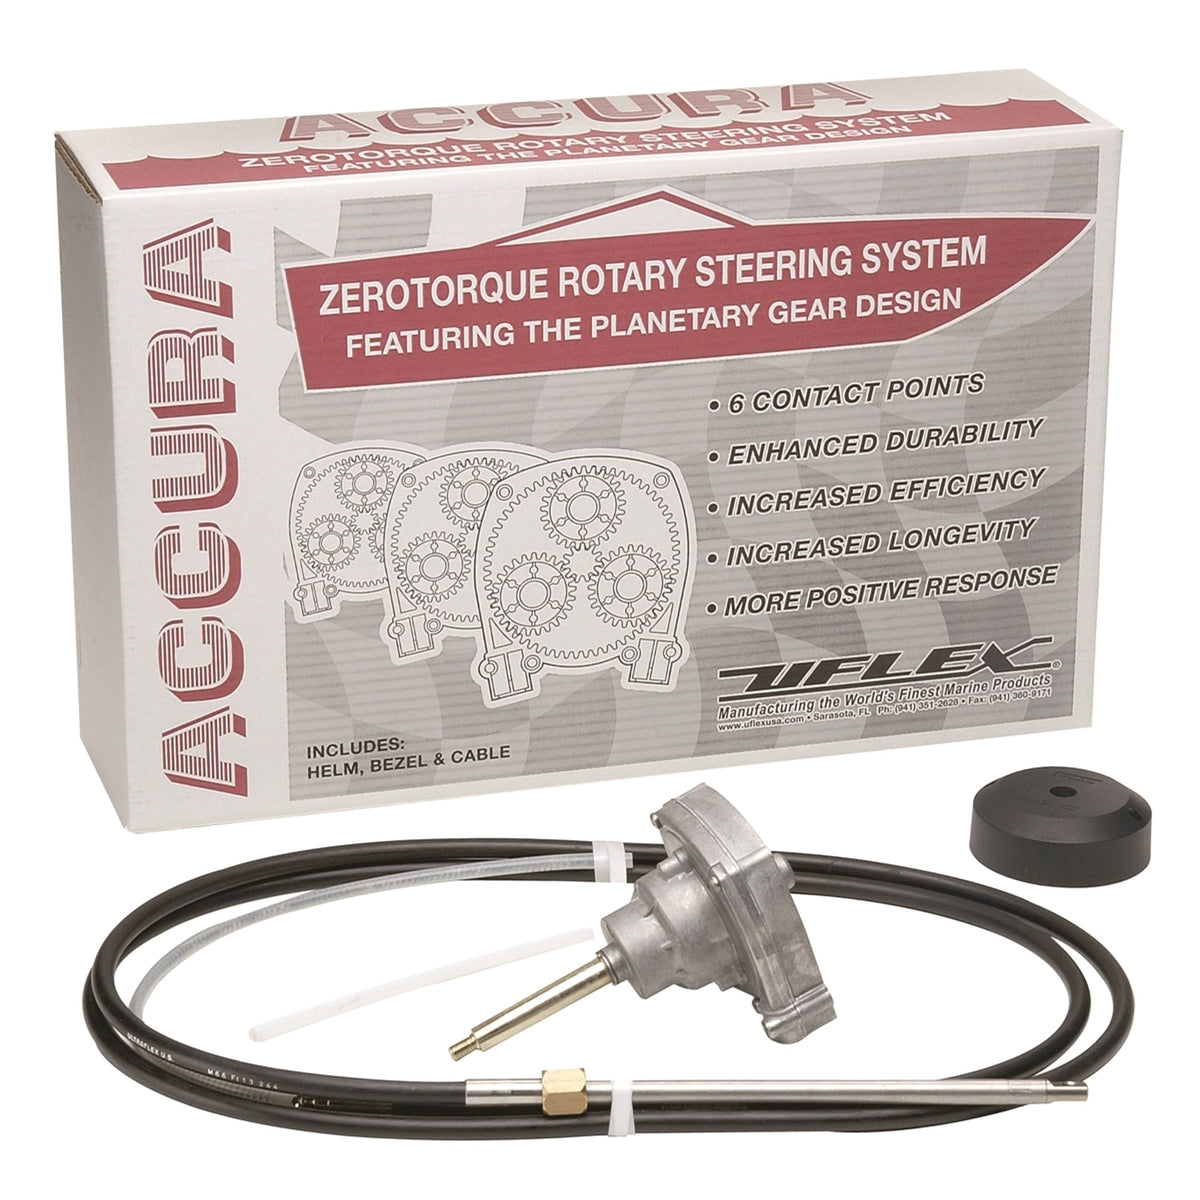 Uflex USA Qualifies for Free Shipping Uflex U.S.A.. Rotary Steering Package 17' #ACCURA17